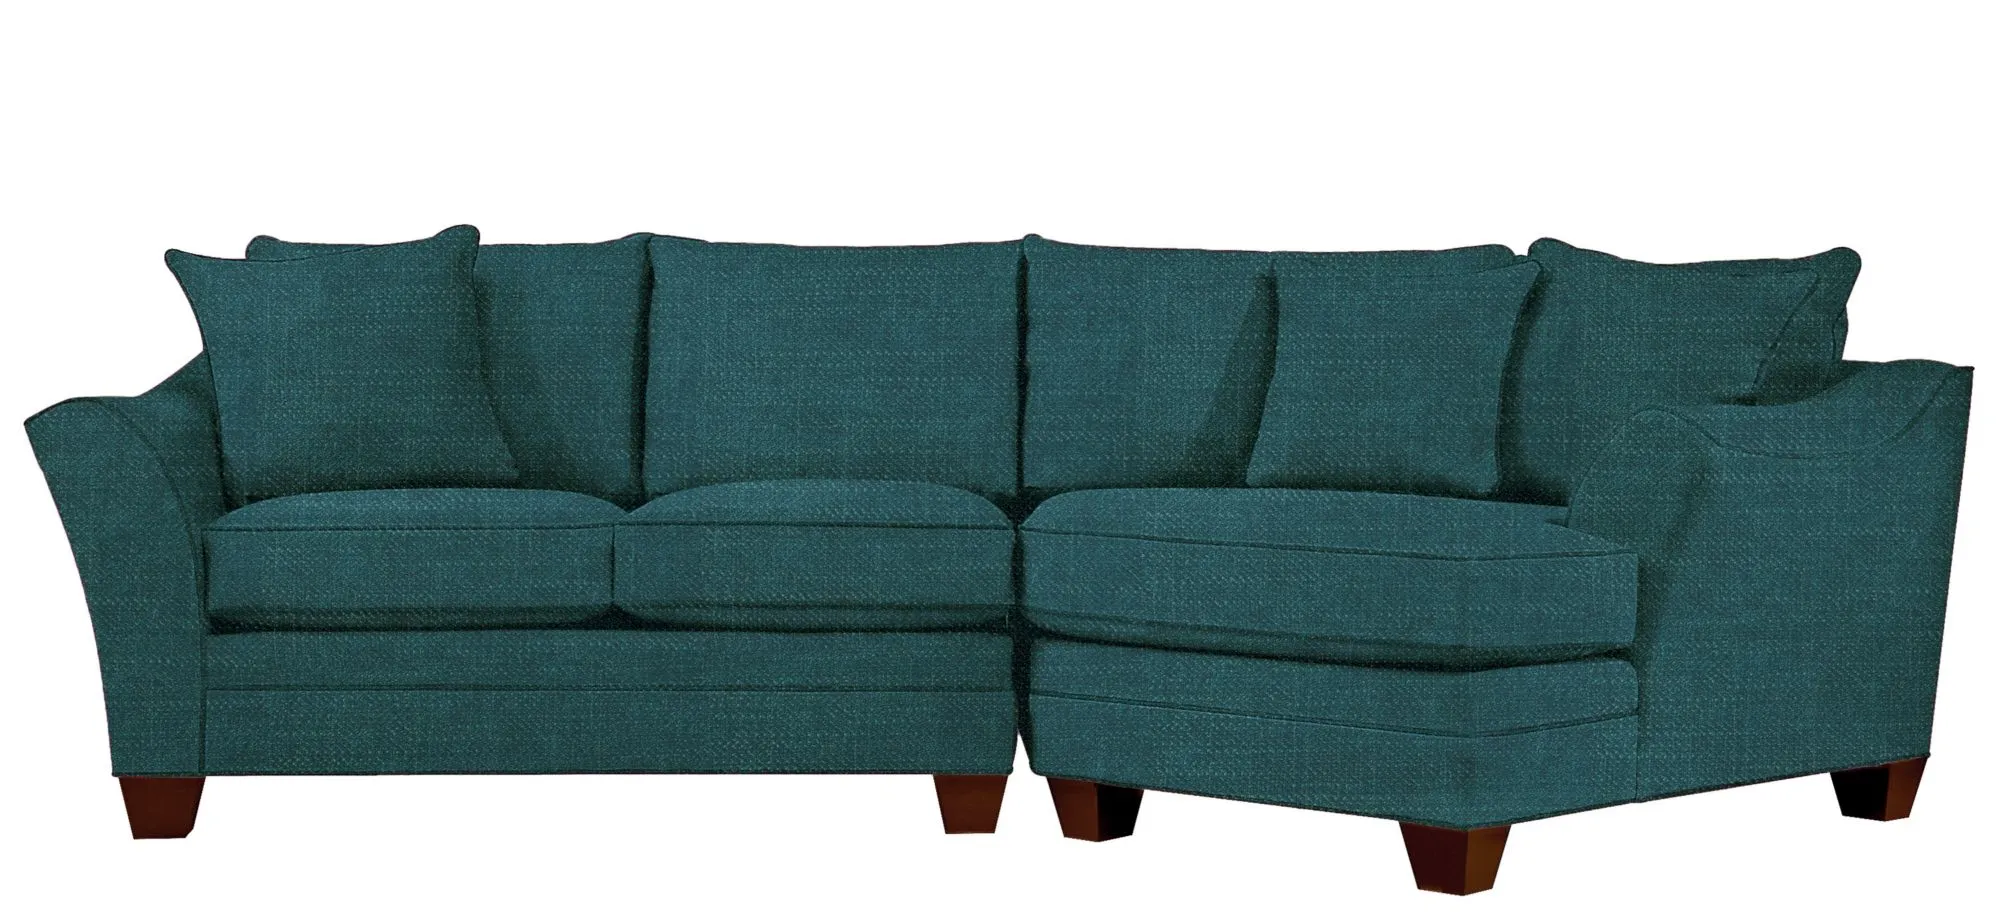 Foresthill 2-pc. Right Hand Cuddler Sectional Sofa in Elliot Teal by H.M. Richards